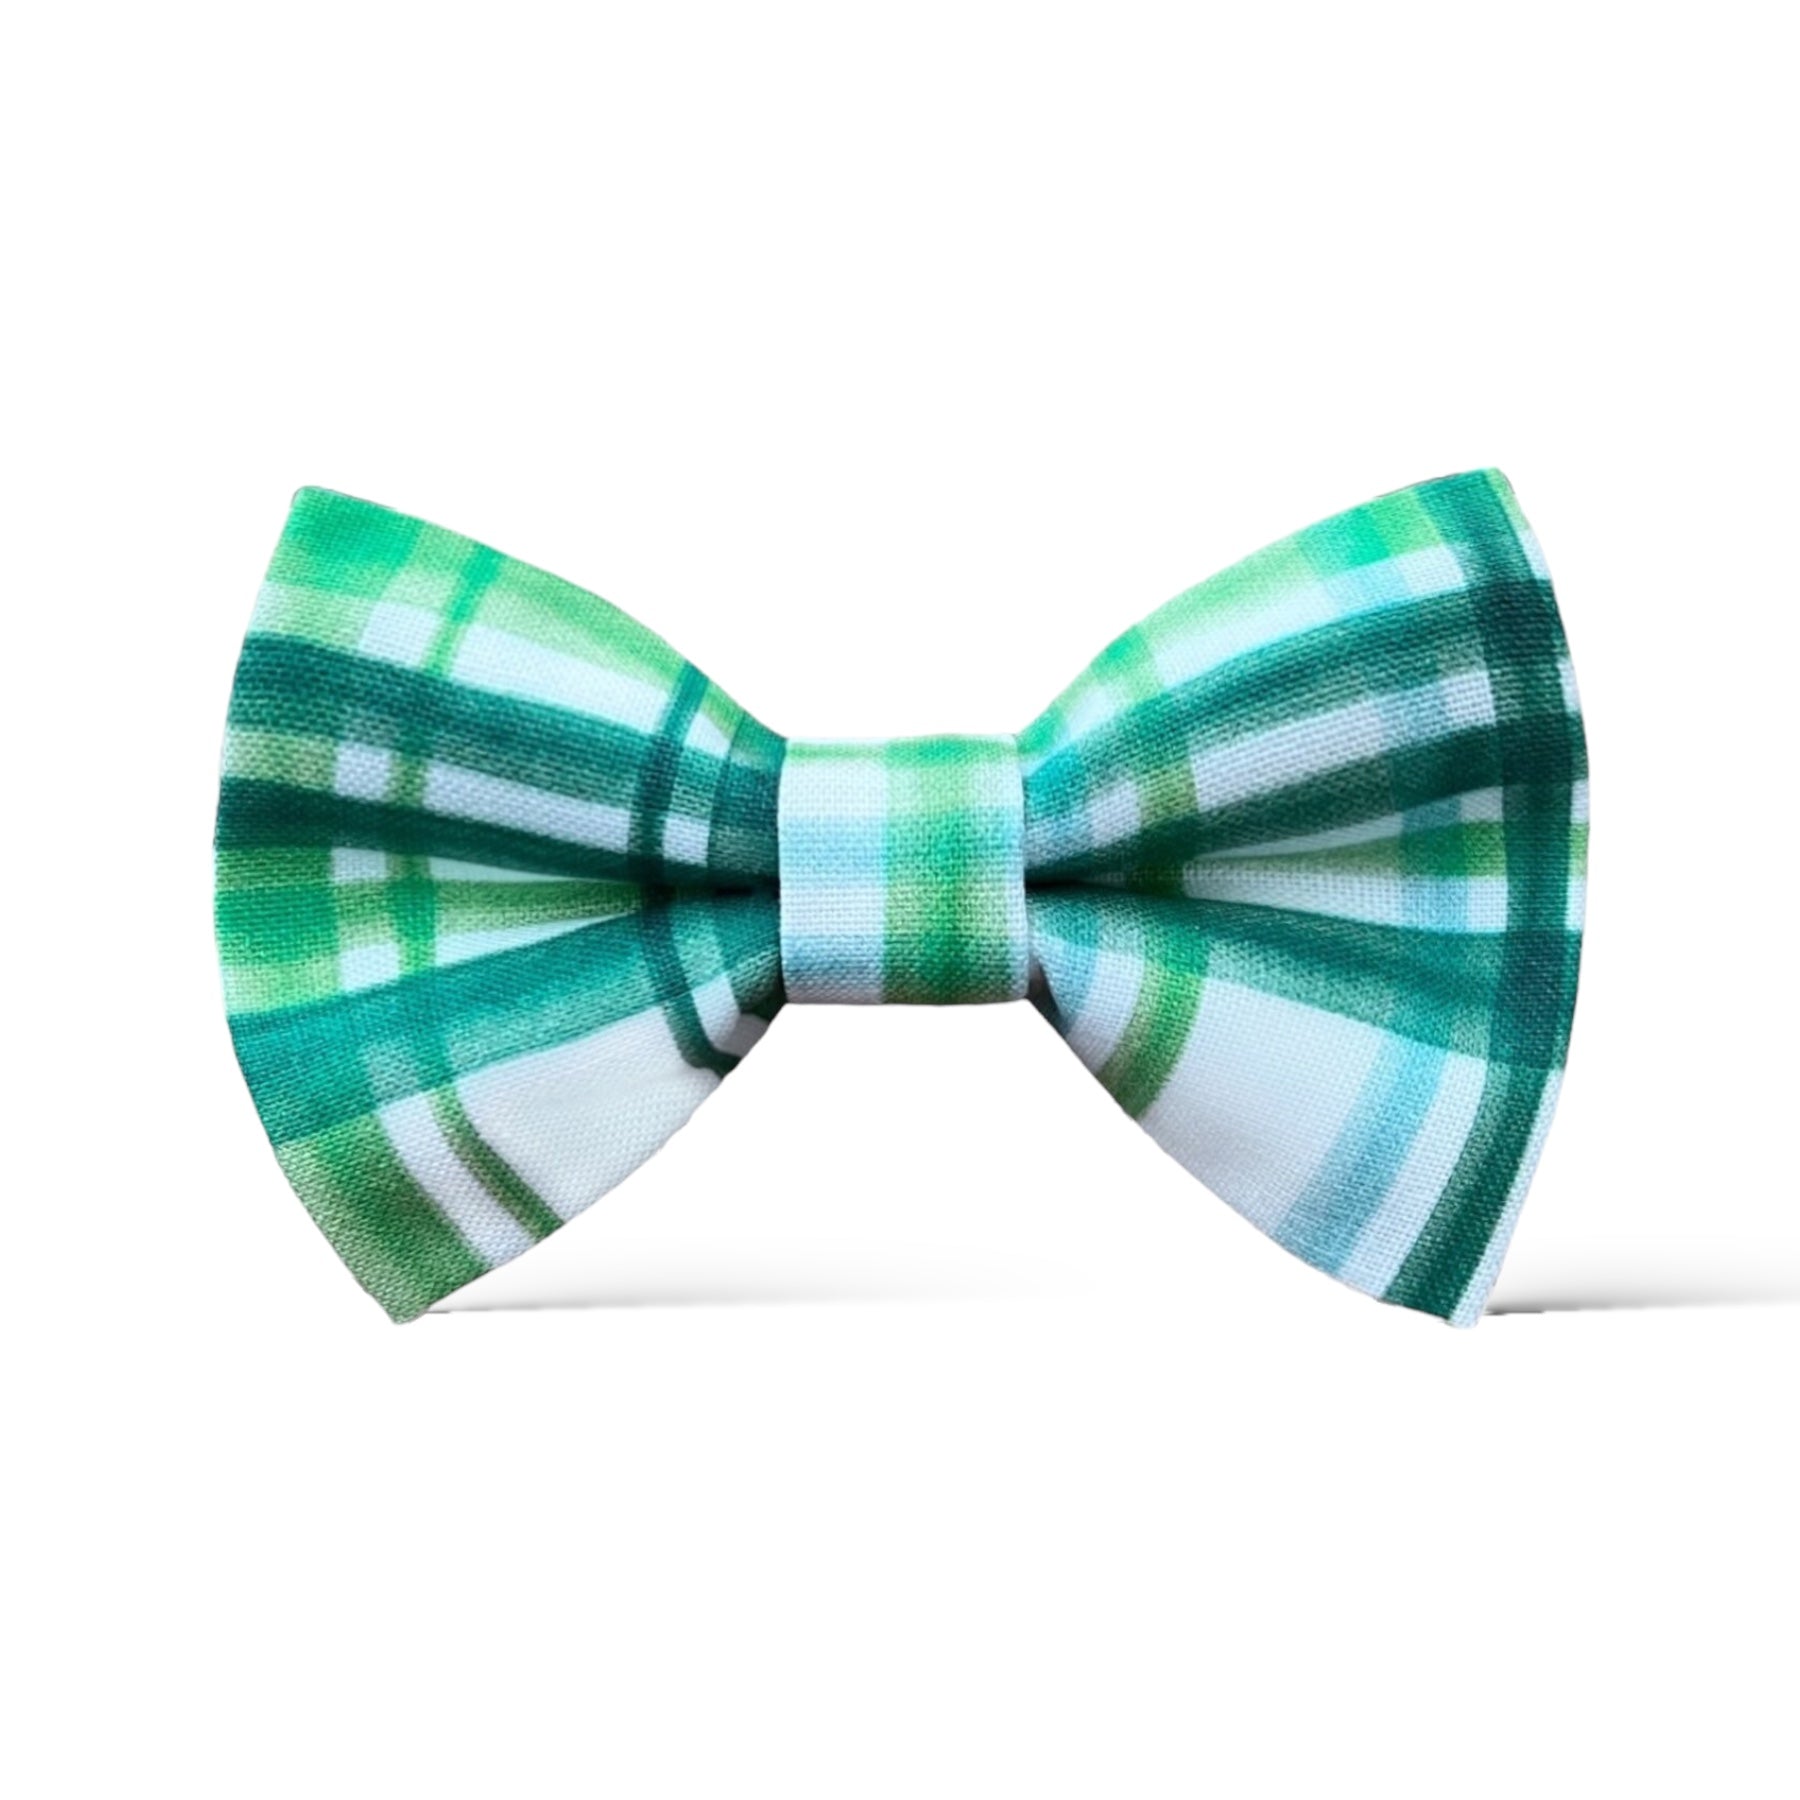 Green & Teal Plaid St. Patrick's Day Bow Tie